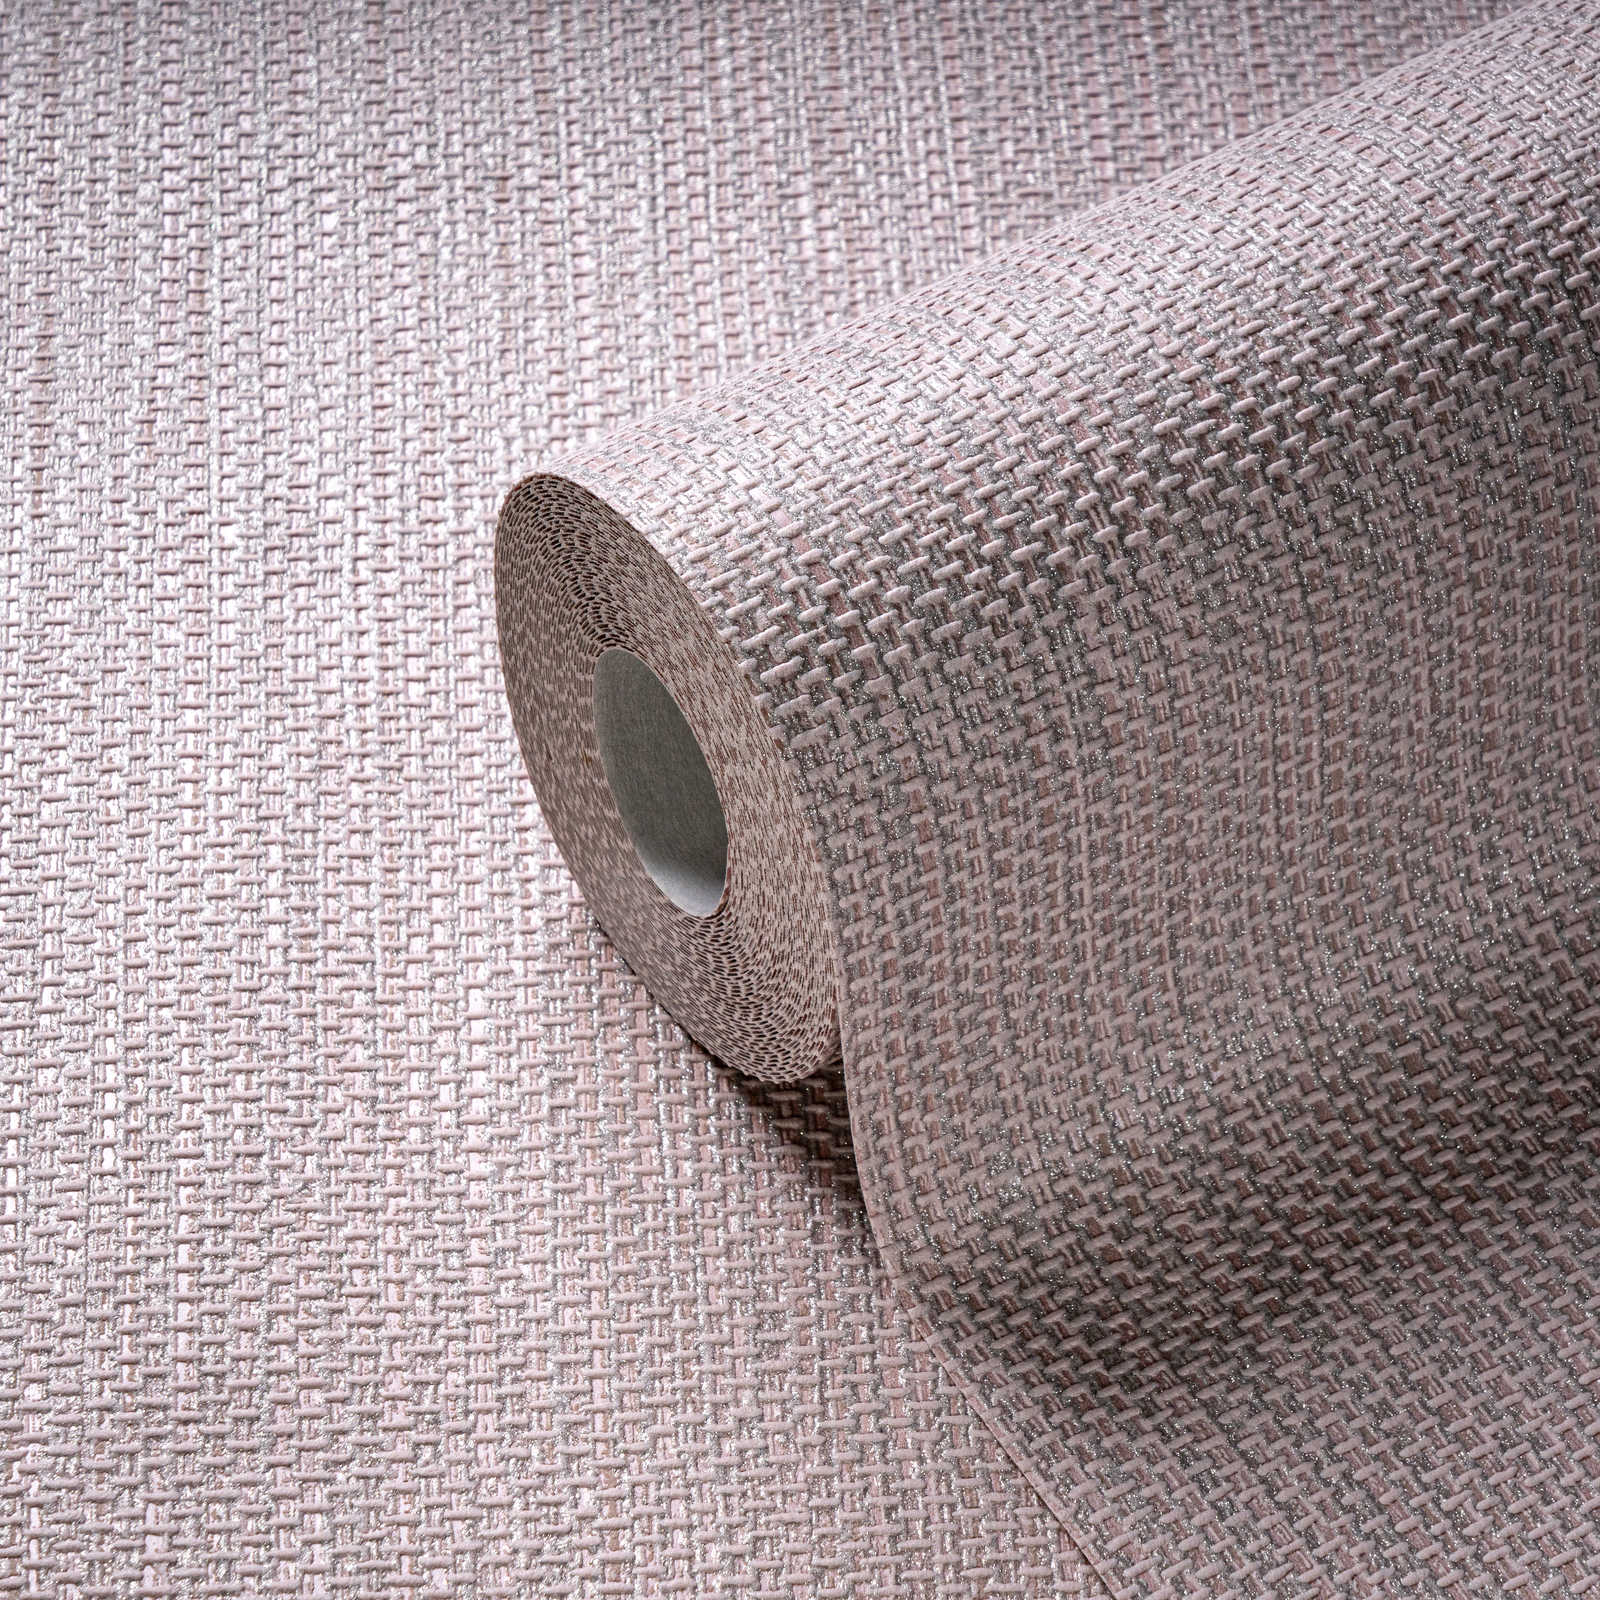             Textured non-woven wallpaper in textile look - pink, silver
        